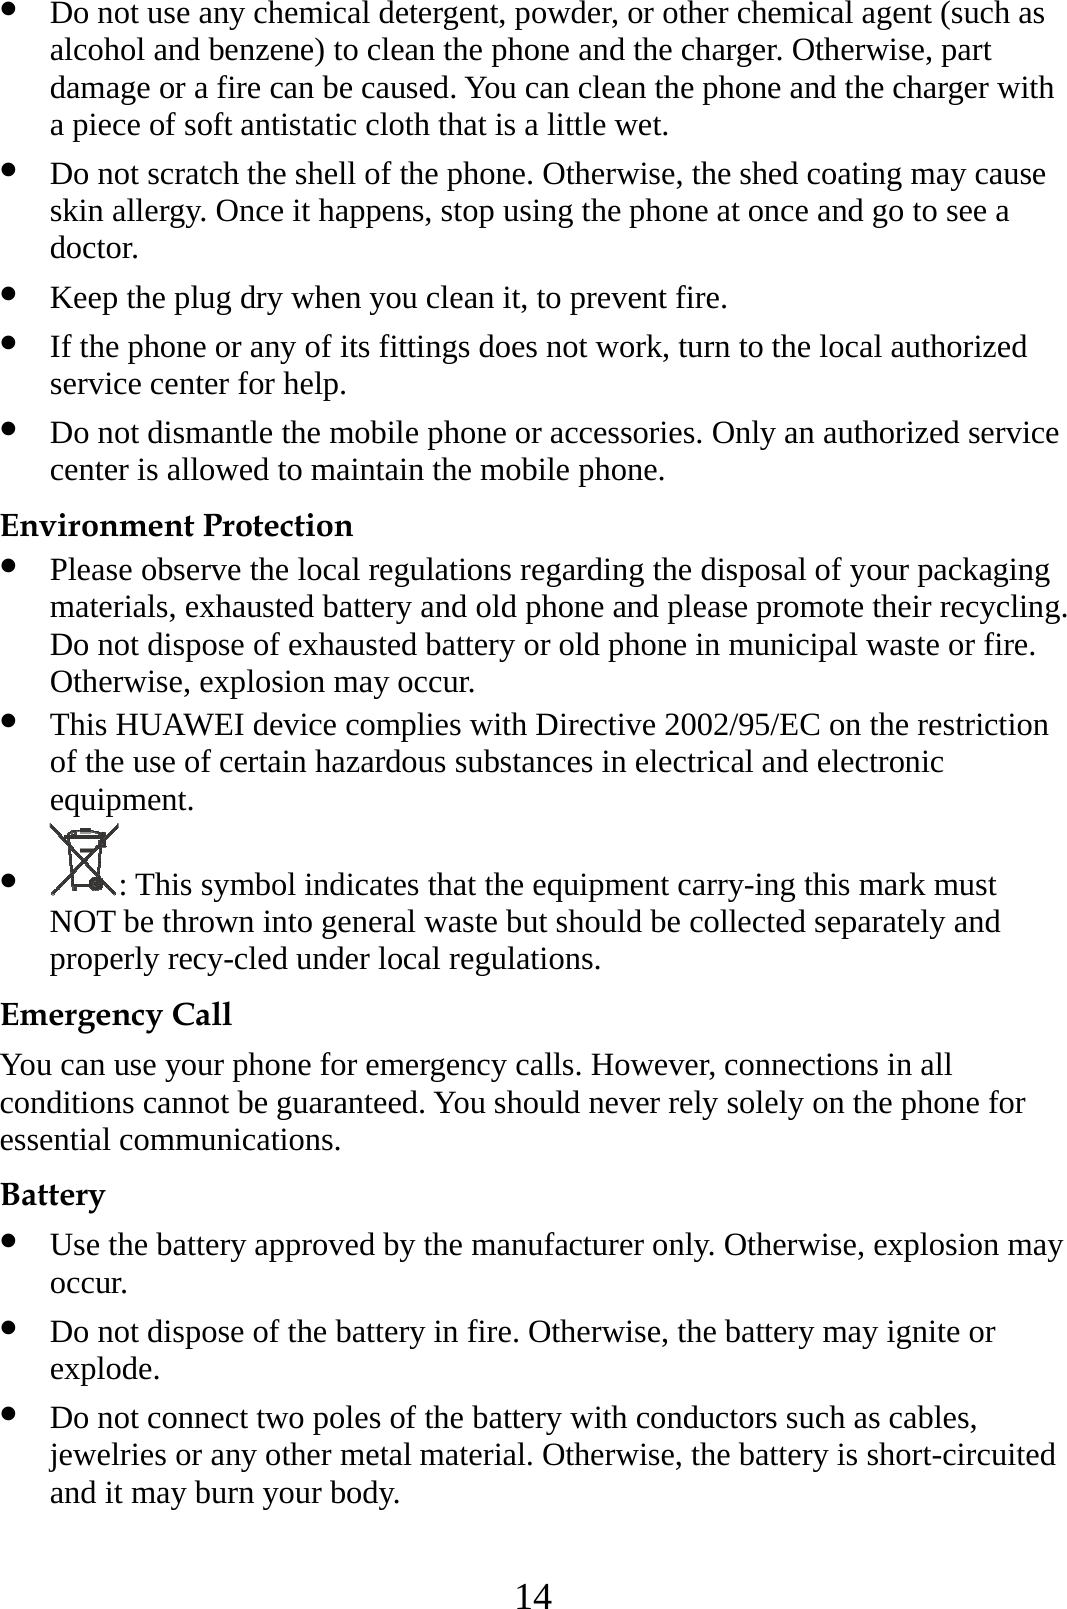 14 z Do not use any chemical detergent, powder, or other chemical agent (such as alcohol and benzene) to clean the phone and the charger. Otherwise, part damage or a fire can be caused. You can clean the phone and the charger with a piece of soft antistatic cloth that is a little wet. z Do not scratch the shell of the phone. Otherwise, the shed coating may cause skin allergy. Once it happens, stop using the phone at once and go to see a doctor. z Keep the plug dry when you clean it, to prevent fire. z If the phone or any of its fittings does not work, turn to the local authorized service center for help. z Do not dismantle the mobile phone or accessories. Only an authorized service center is allowed to maintain the mobile phone. Environment Protection z Please observe the local regulations regarding the disposal of your packaging materials, exhausted battery and old phone and please promote their recycling. Do not dispose of exhausted battery or old phone in municipal waste or fire. Otherwise, explosion may occur. z This HUAWEI device complies with Directive 2002/95/EC on the restriction of the use of certain hazardous substances in electrical and electronic equipment. z : This symbol indicates that the equipment carry-ing this mark must NOT be thrown into general waste but should be collected separately and properly recy-cled under local regulations. Emergency Call You can use your phone for emergency calls. However, connections in all conditions cannot be guaranteed. You should never rely solely on the phone for essential communications. Battery z Use the battery approved by the manufacturer only. Otherwise, explosion may occur. z Do not dispose of the battery in fire. Otherwise, the battery may ignite or explode. z Do not connect two poles of the battery with conductors such as cables, jewelries or any other metal material. Otherwise, the battery is short-circuited and it may burn your body. 